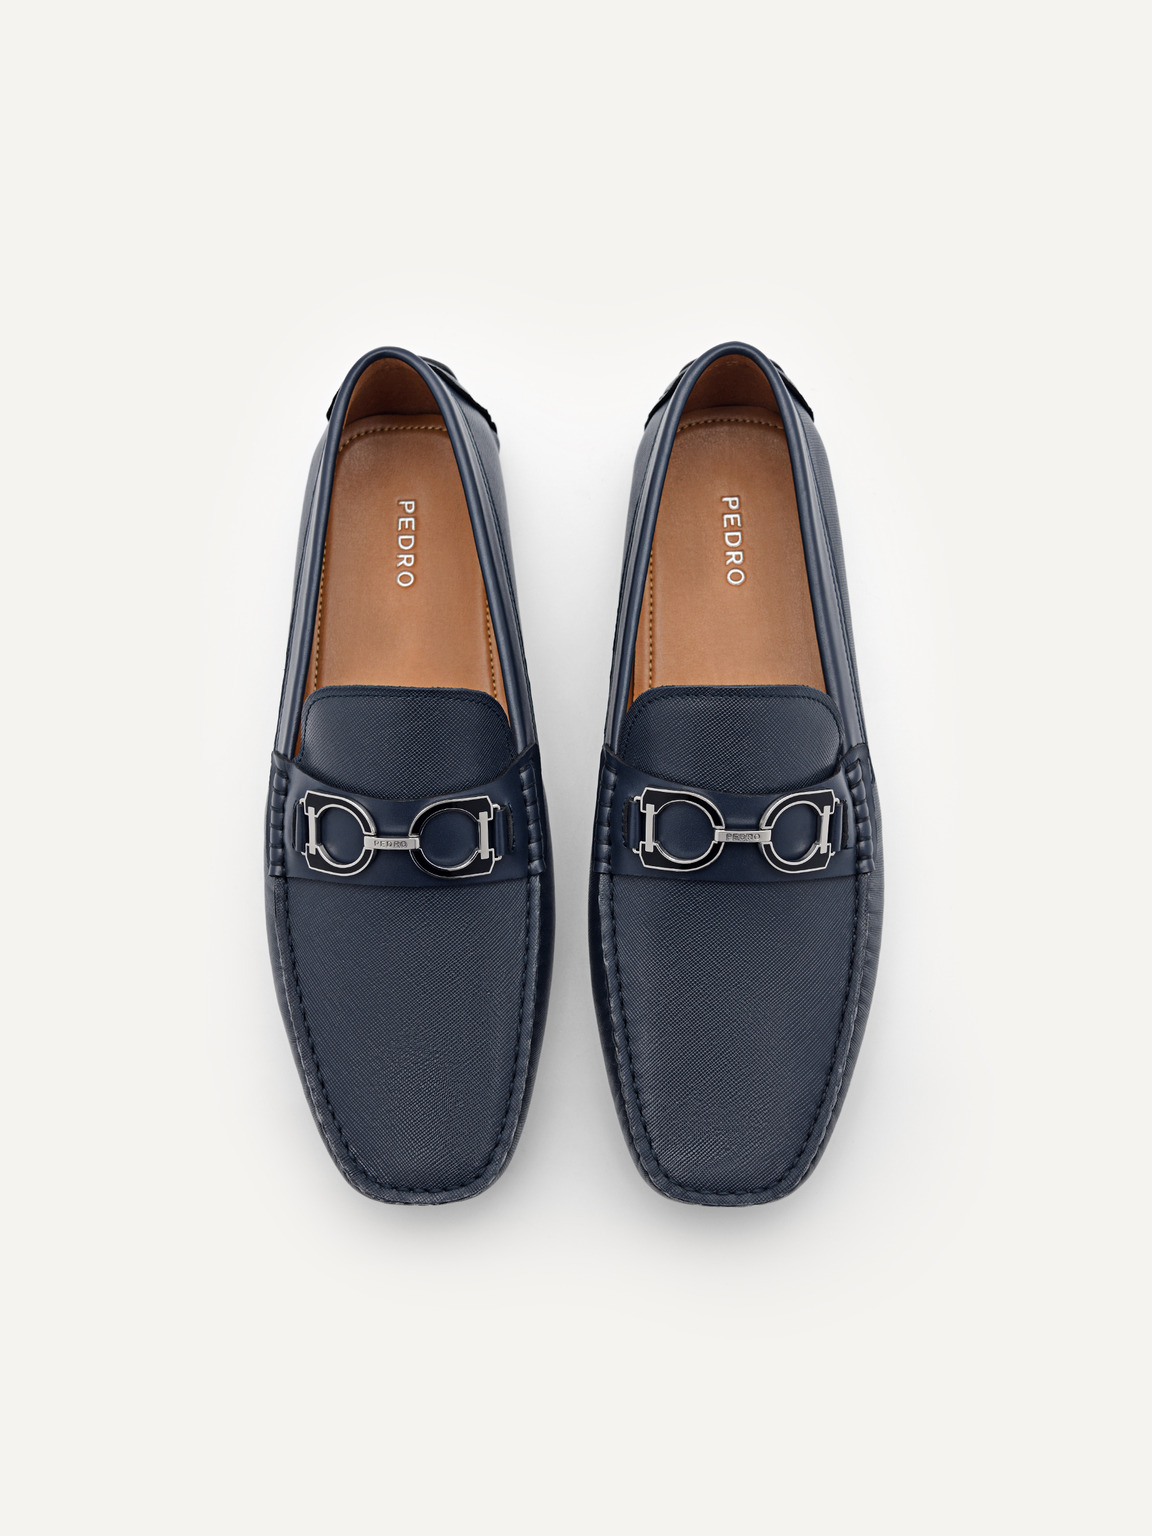 Antonio Leather Driving Shoes, Navy